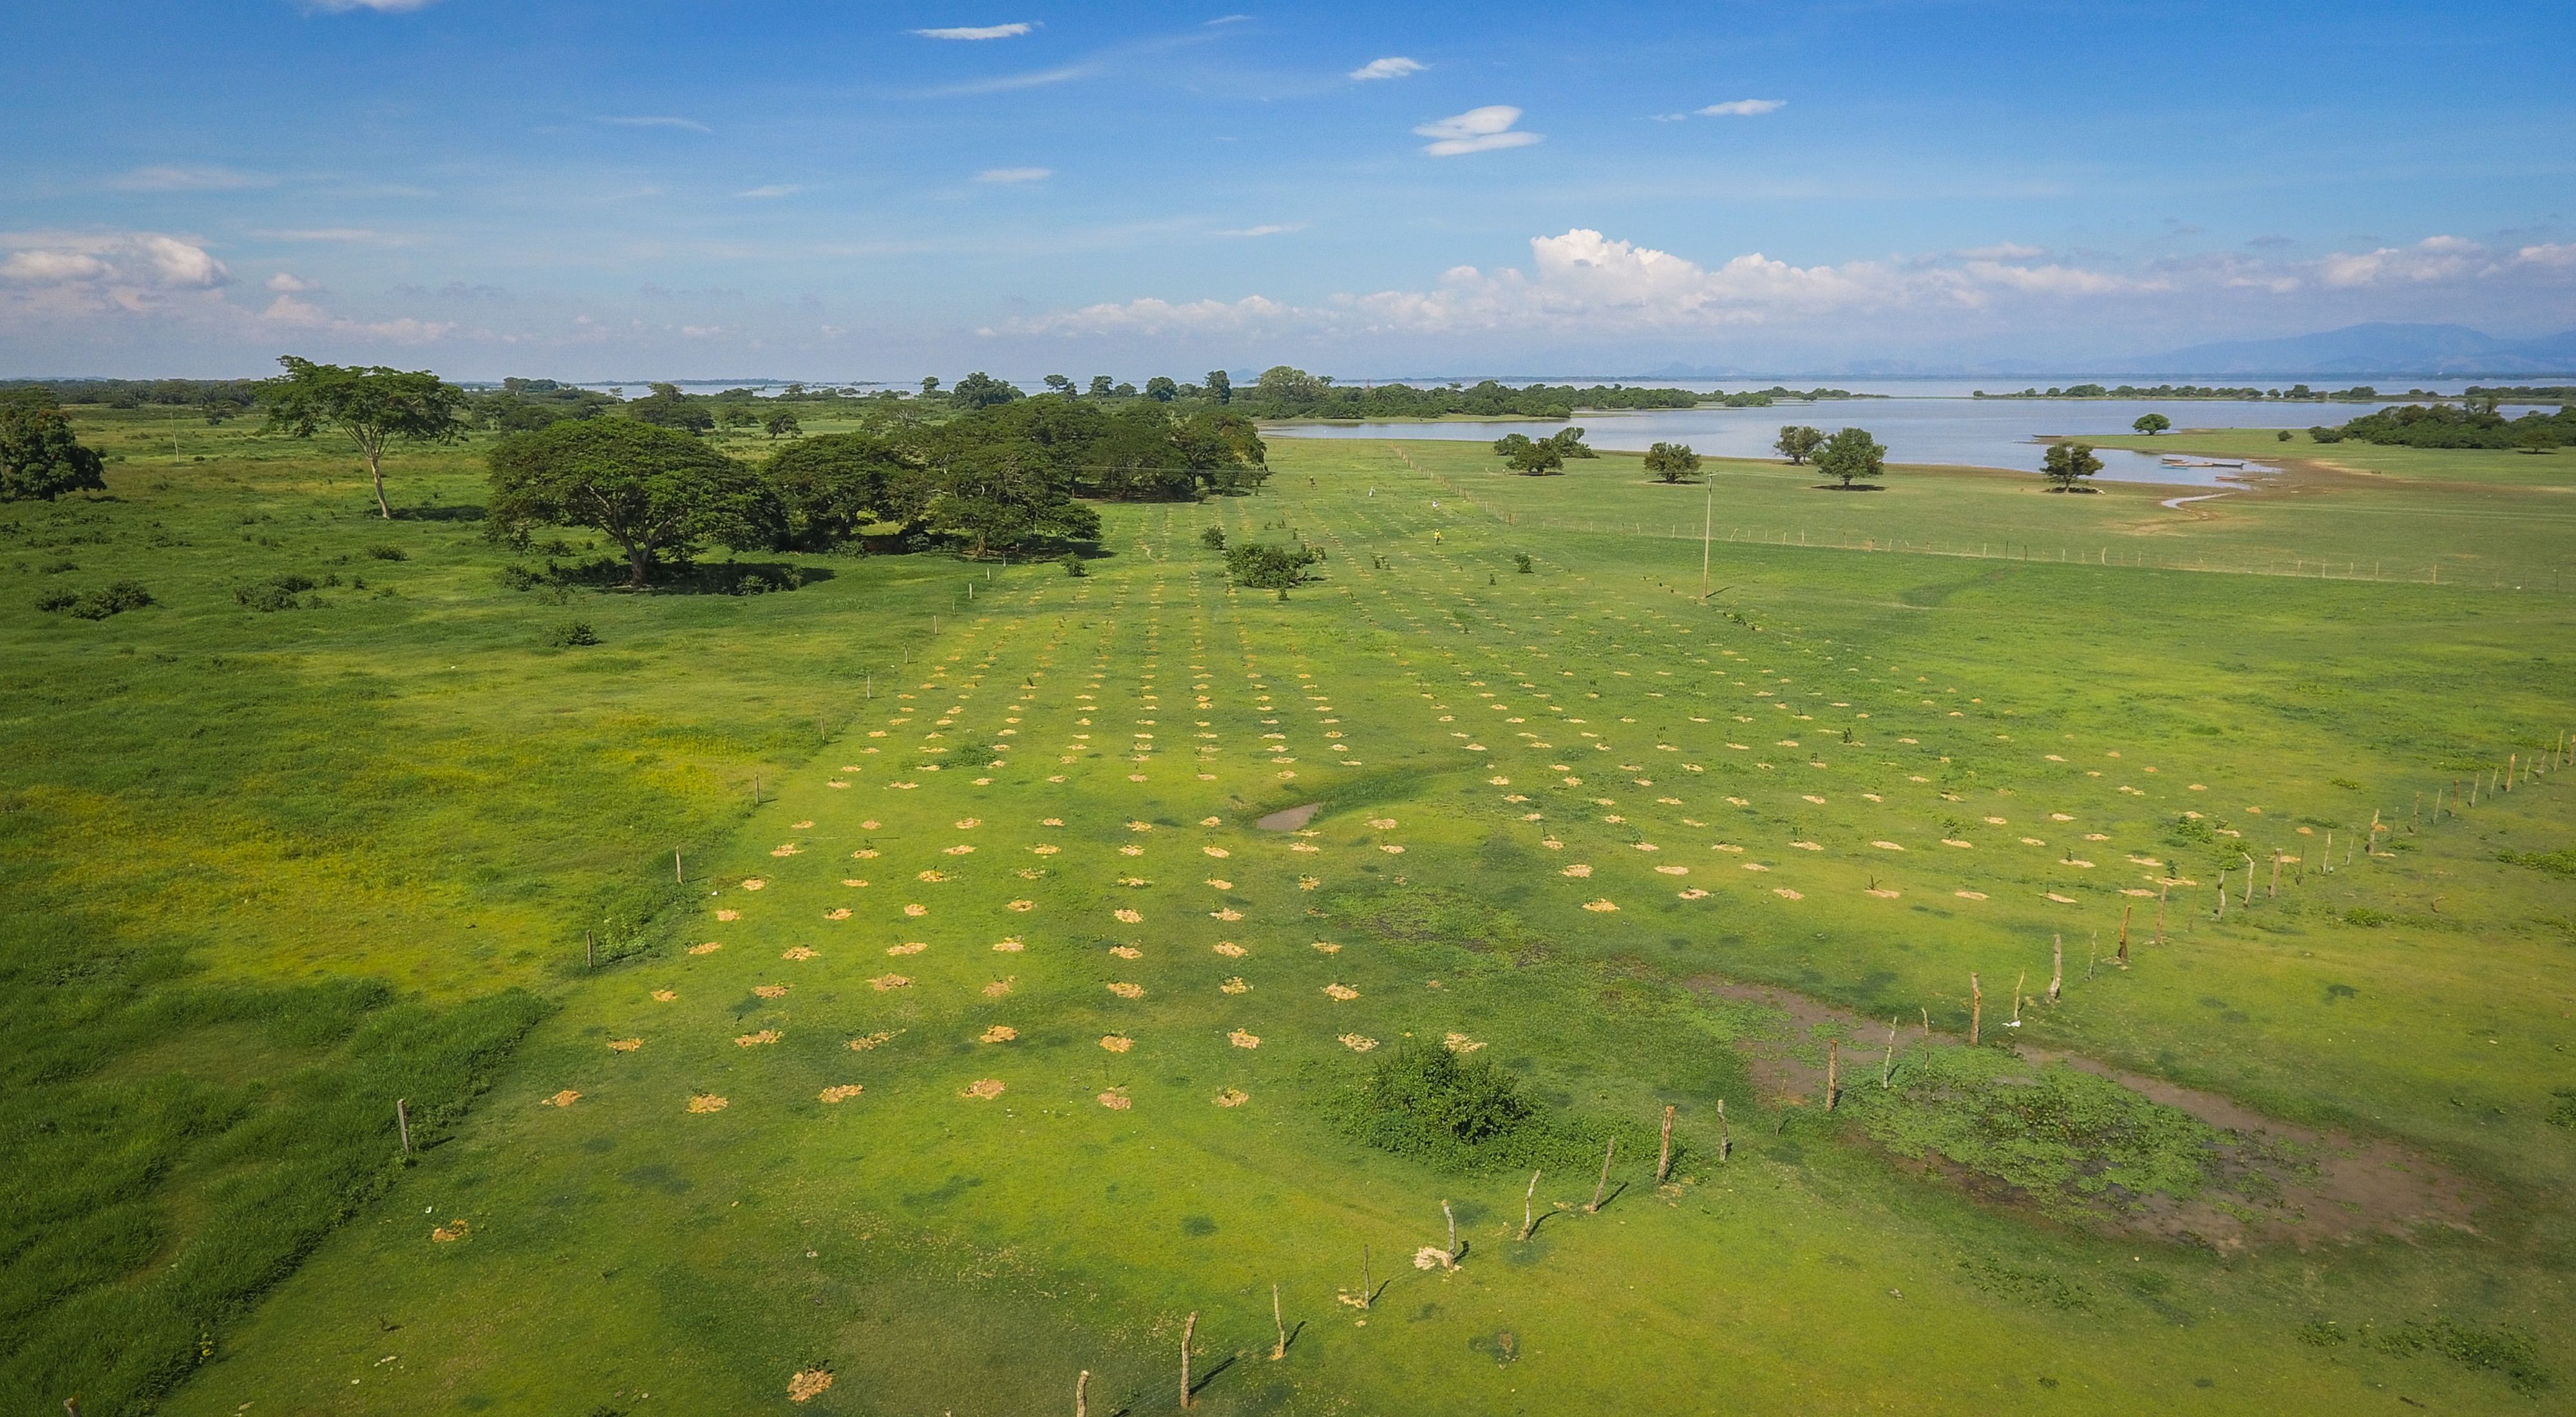 Aerial shot of a restoration area in a wetland, seedlings recently planted on the ground